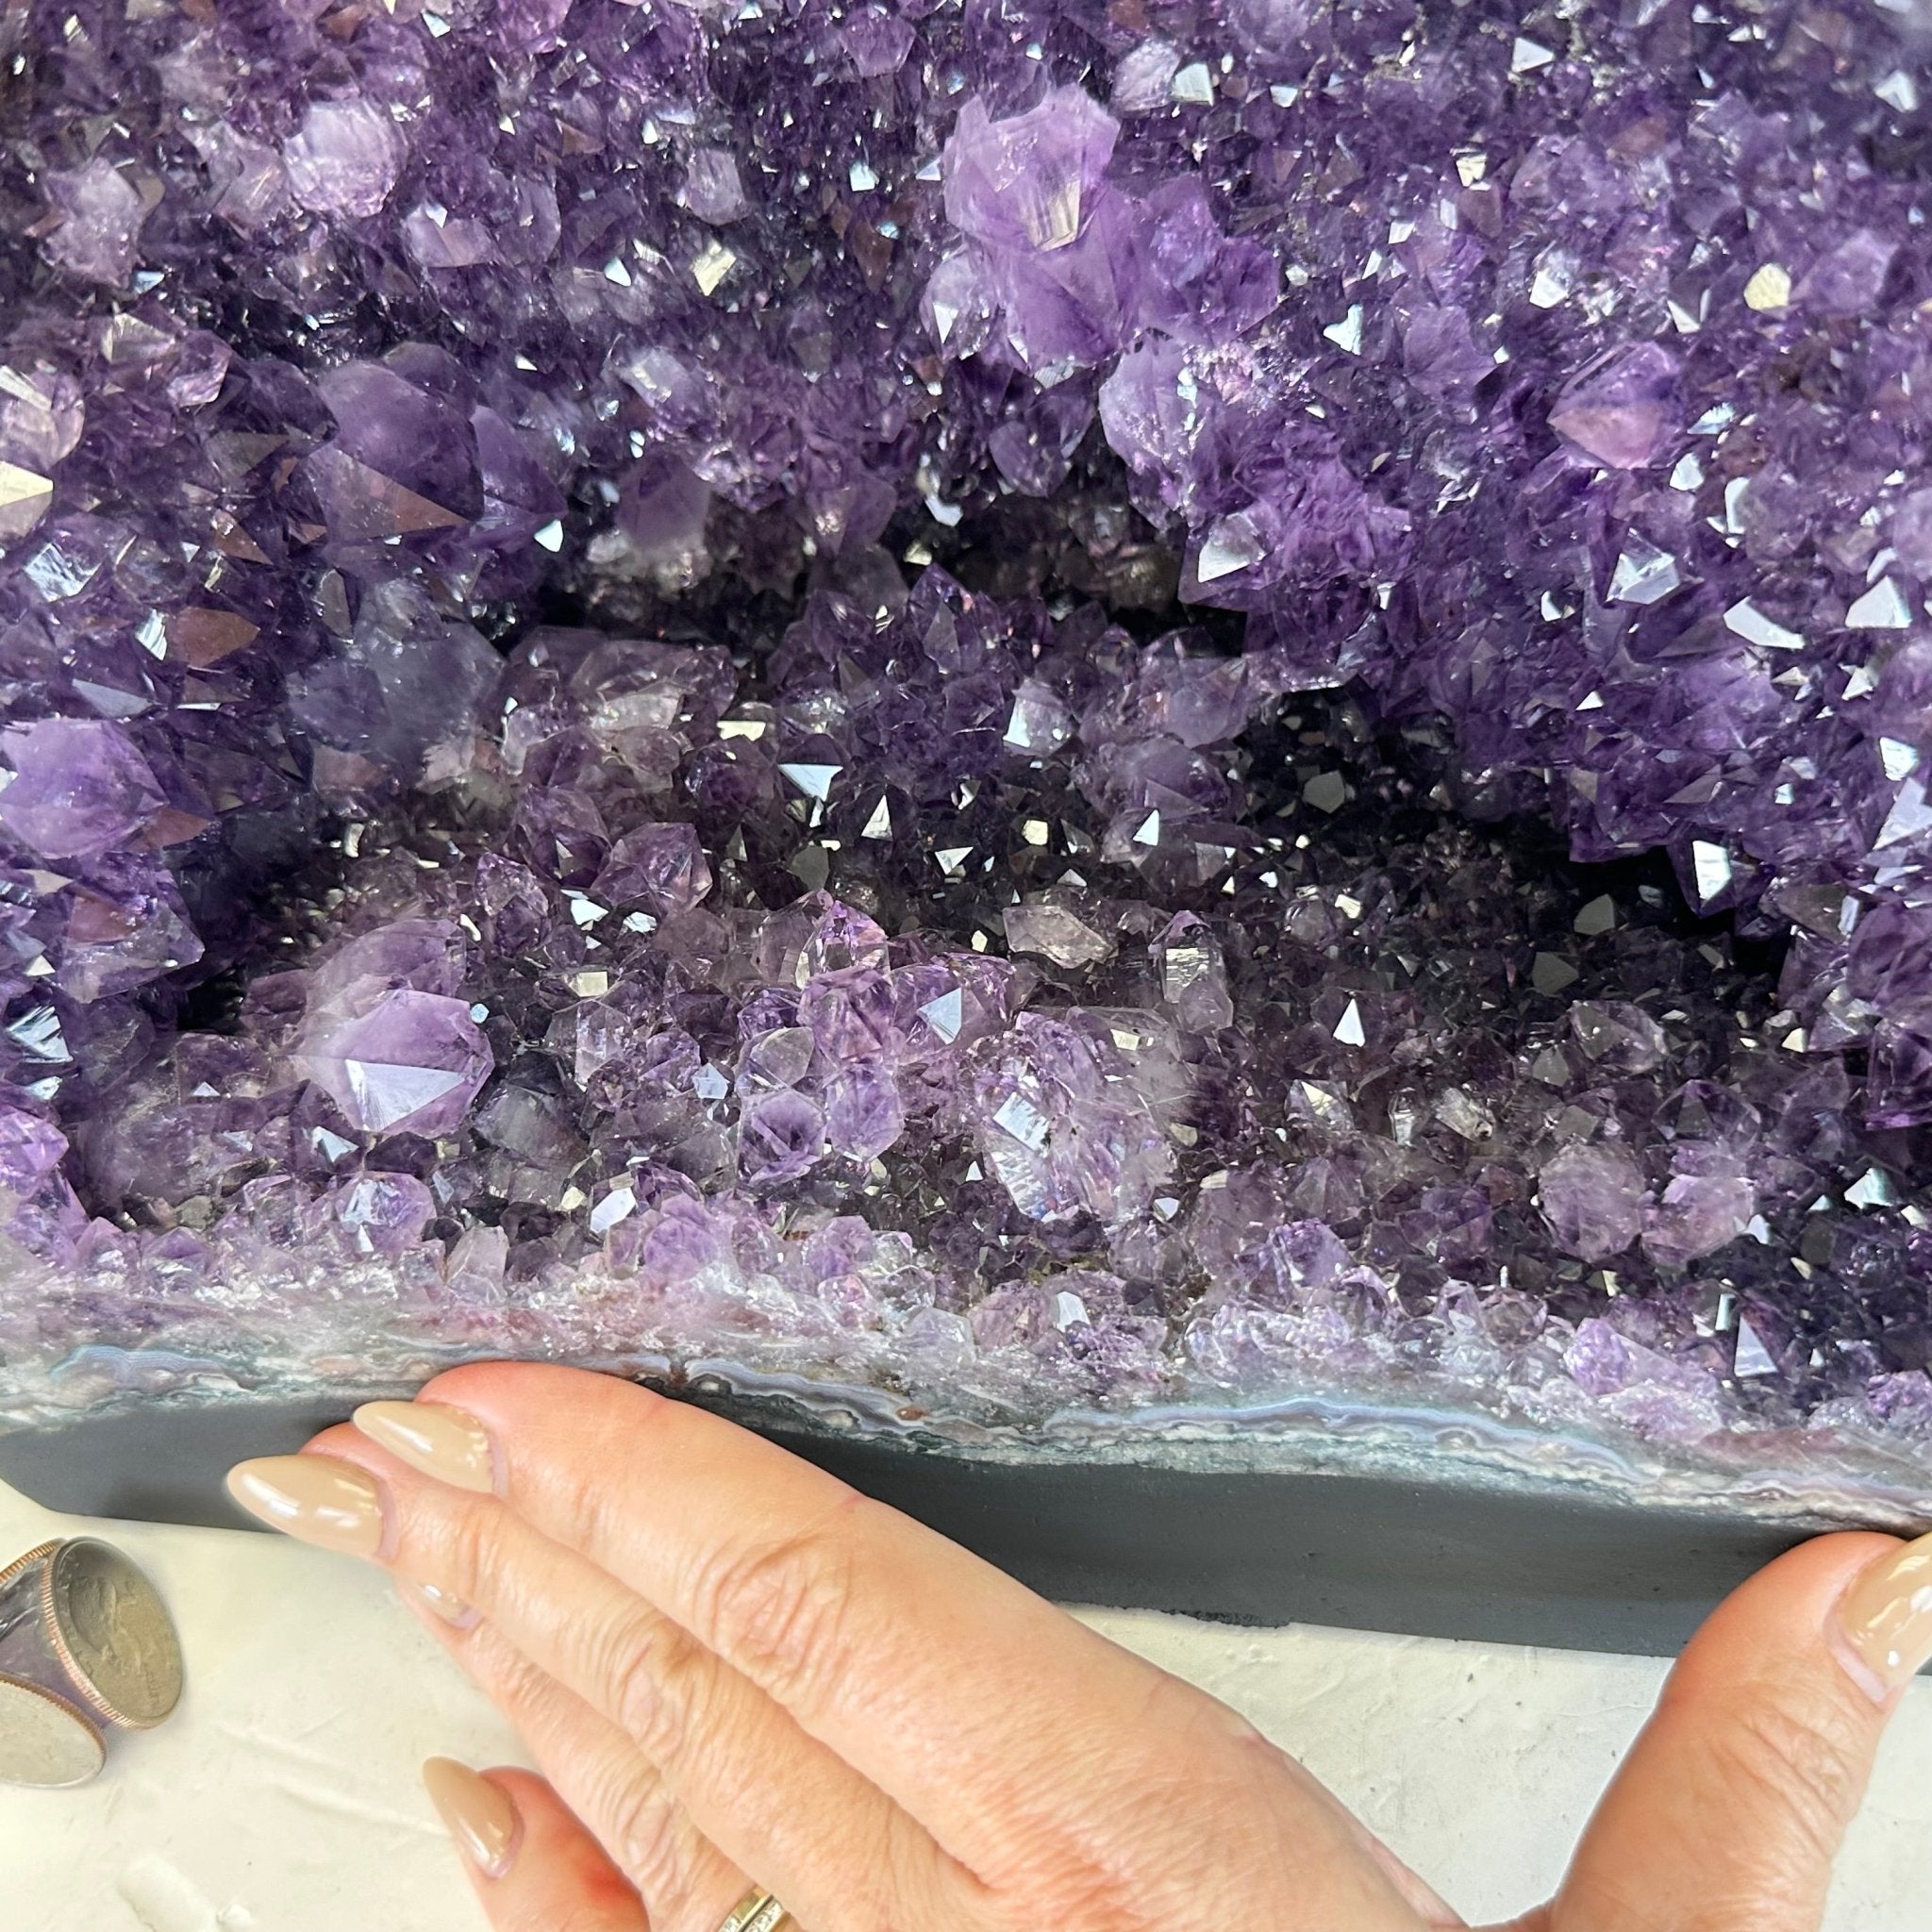 Quality Brazilian Amethyst Cathedral, 30.1 lbs & 12.3" Tall, #5601 - 1404 - Brazil GemsBrazil GemsQuality Brazilian Amethyst Cathedral, 30.1 lbs & 12.3" Tall, #5601 - 1404Cathedrals5601 - 1404